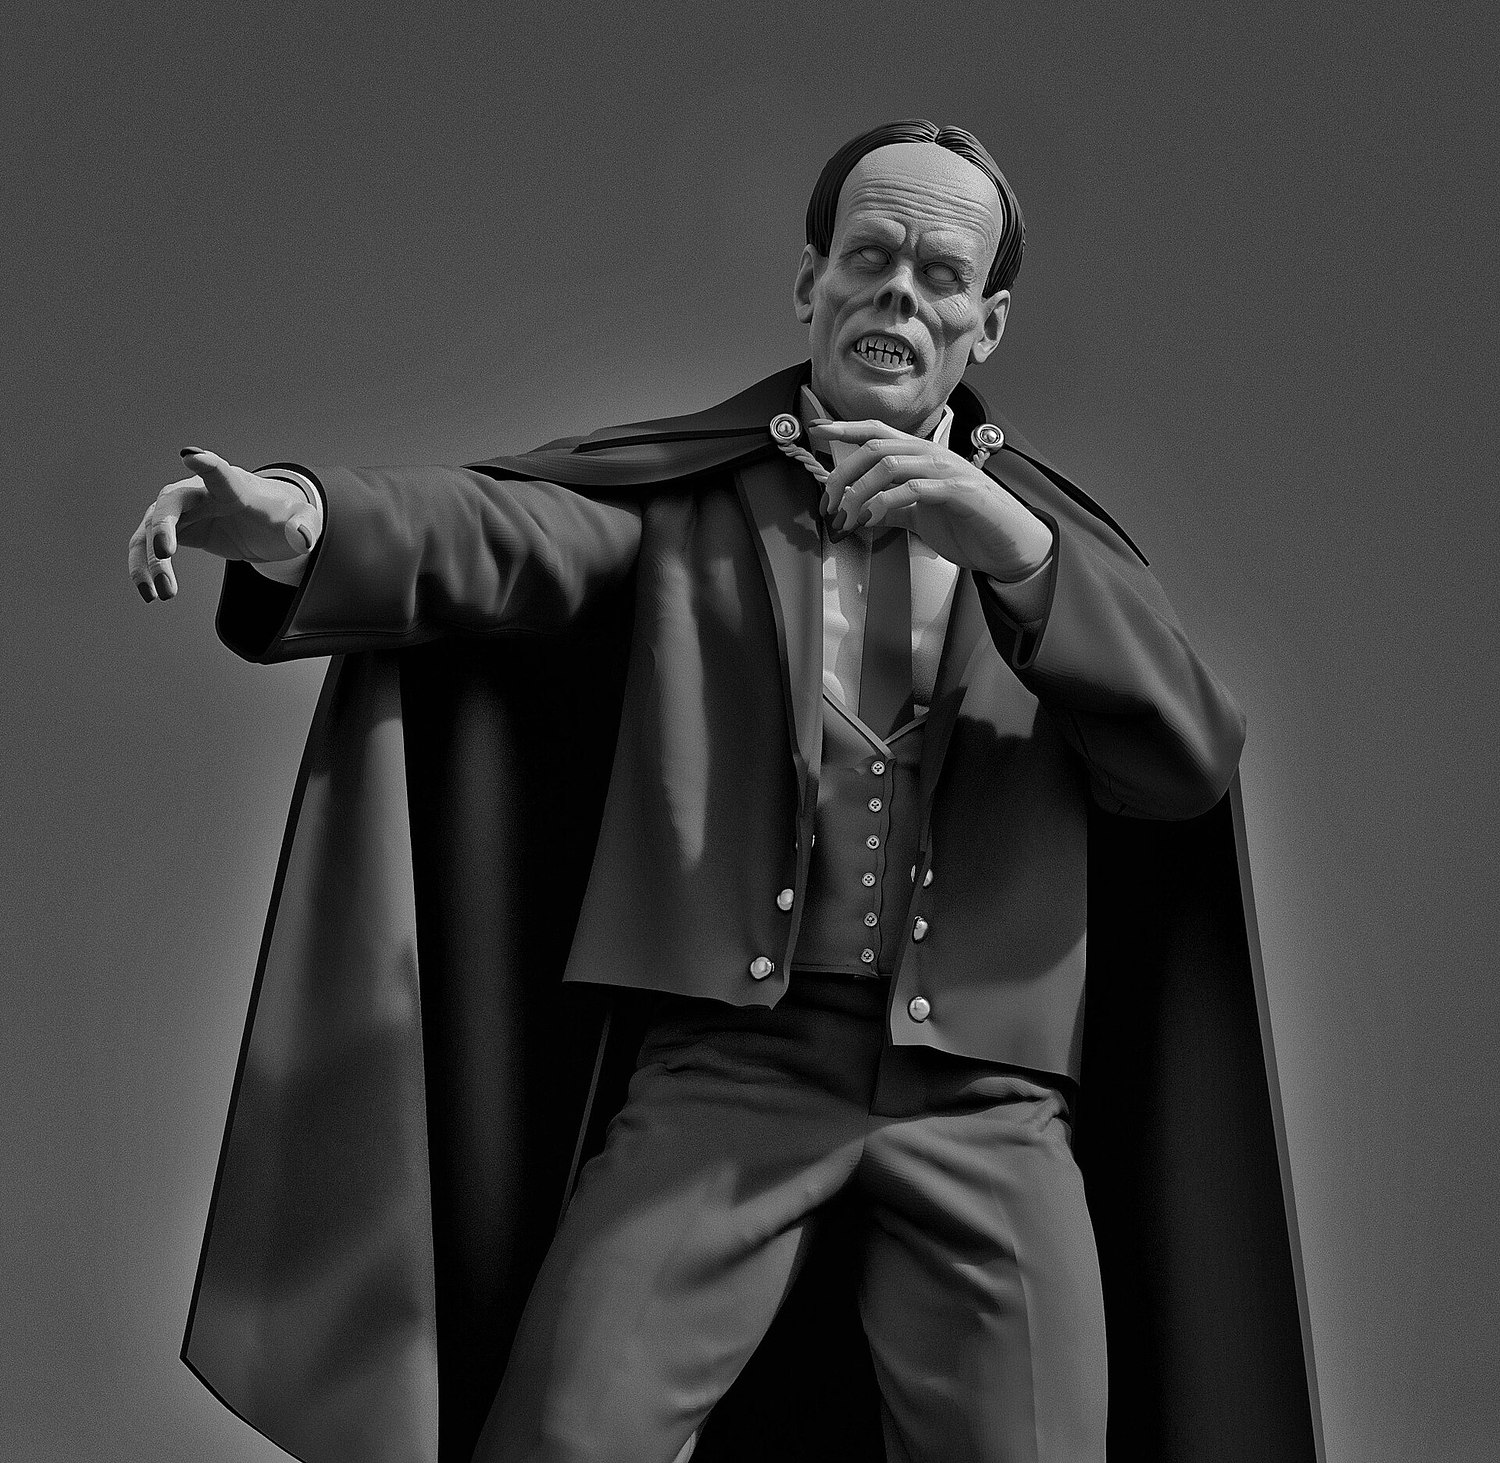 The Phantom of the Opera From Classic Monsters